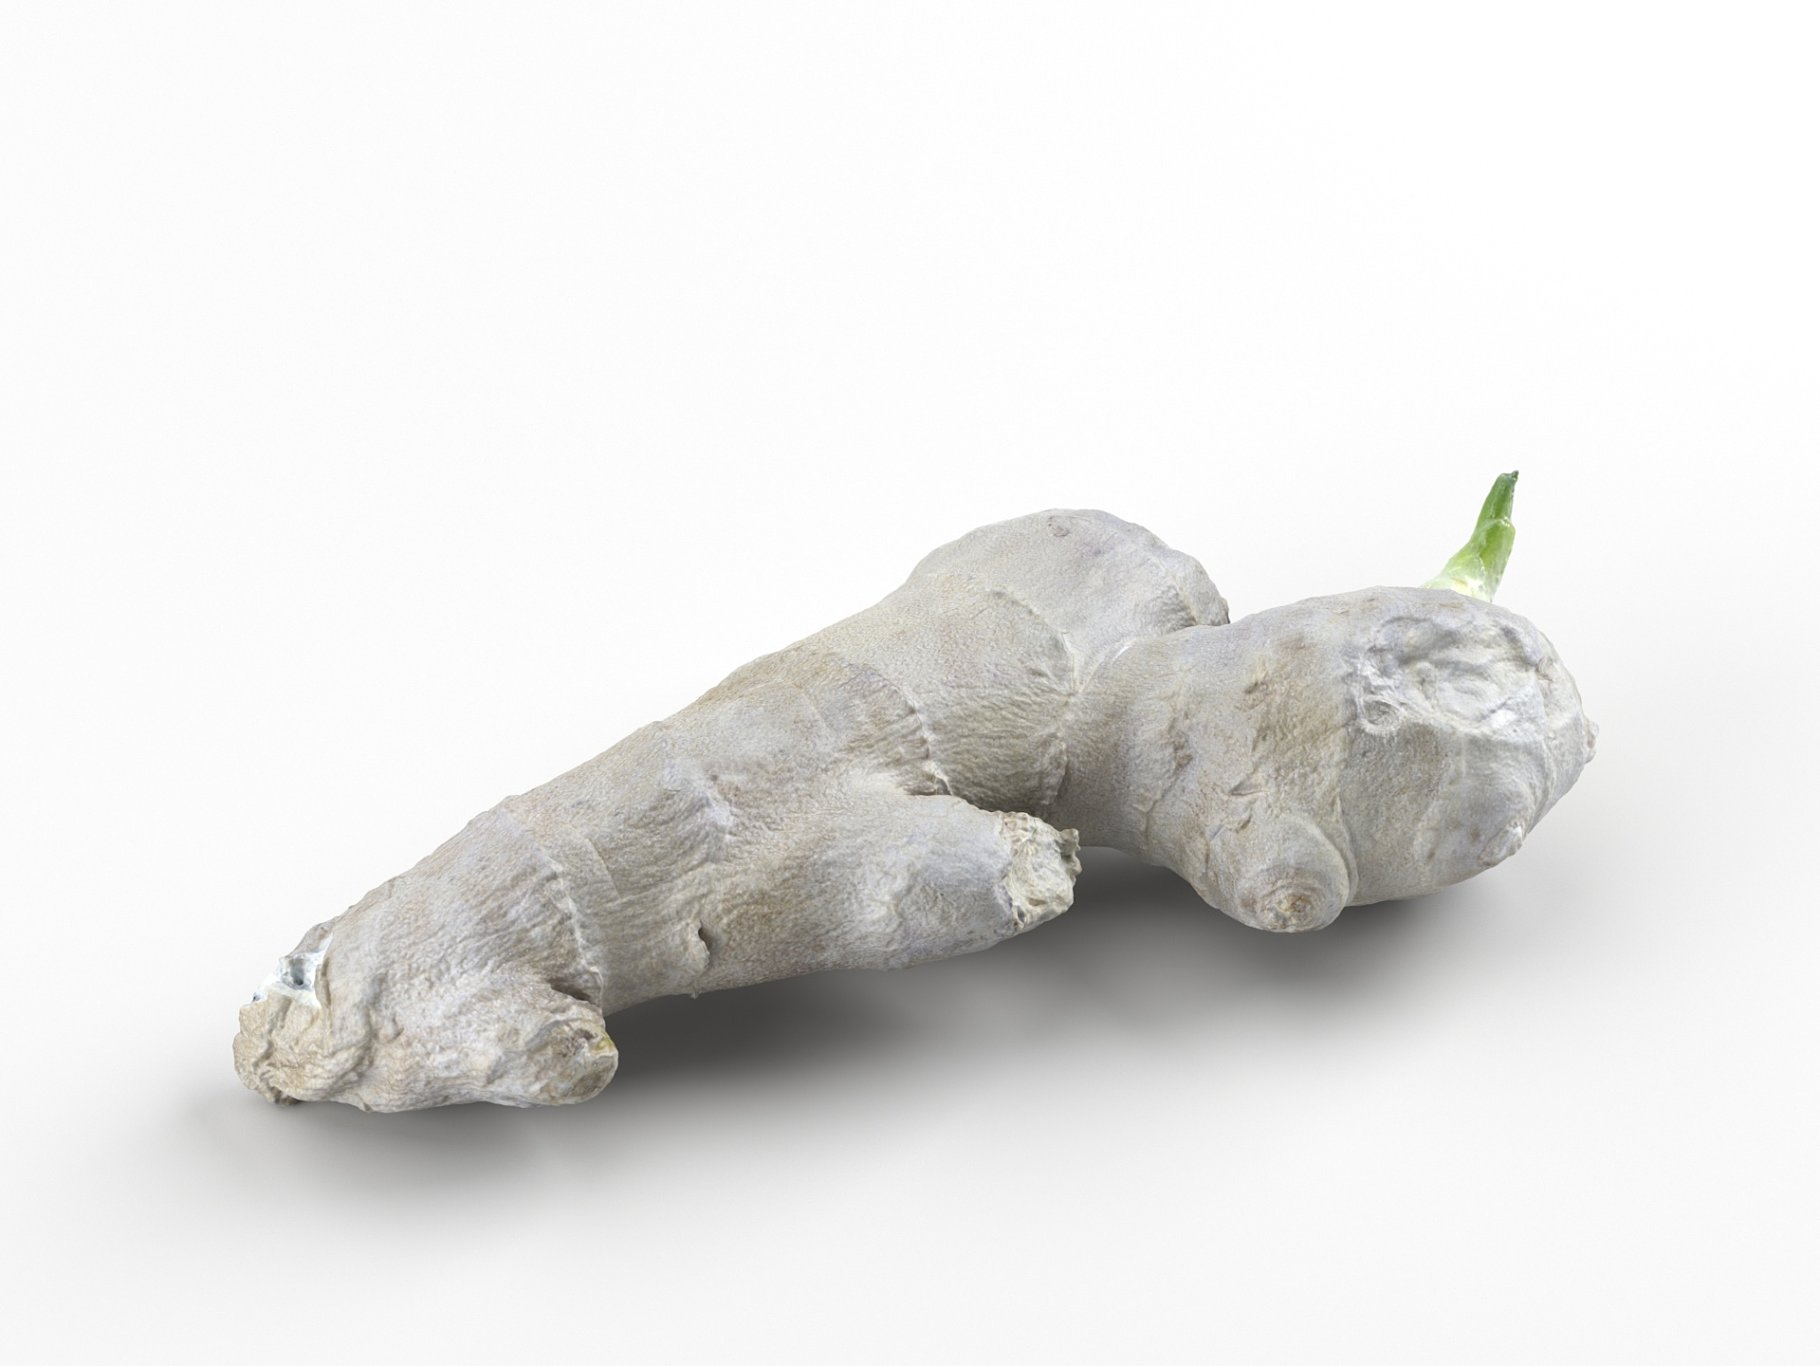 Image of ginger root.